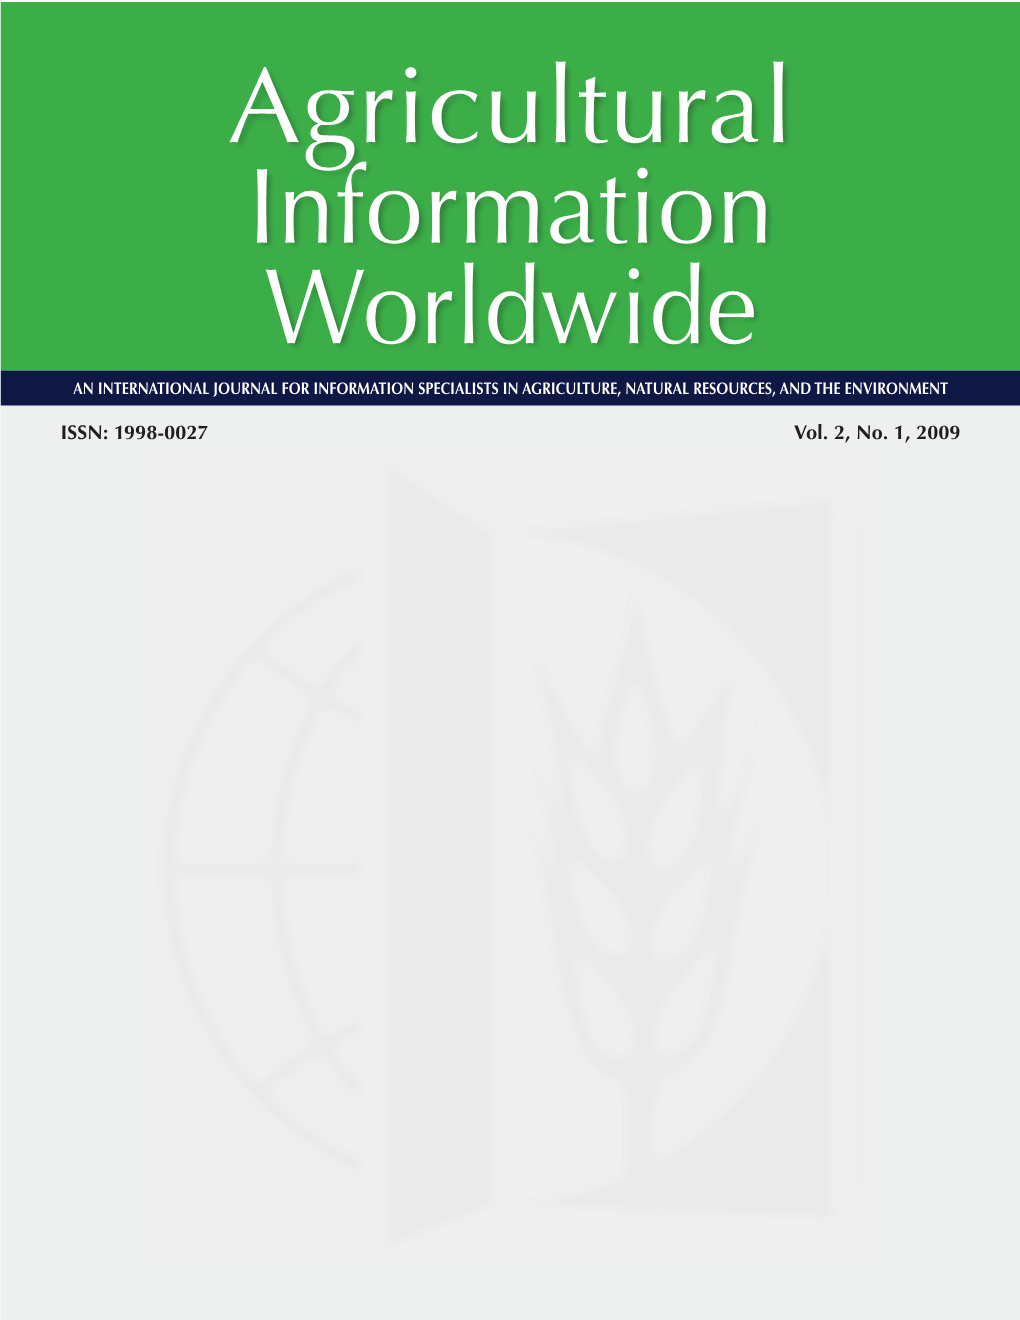 Agricultural Information Worldwide an INTERNATIONAL JOURNAL for INFORMATION SPECIALISTS in AGRICULTURE, NATURAL RESOURCES, and the ENVIRONMENT